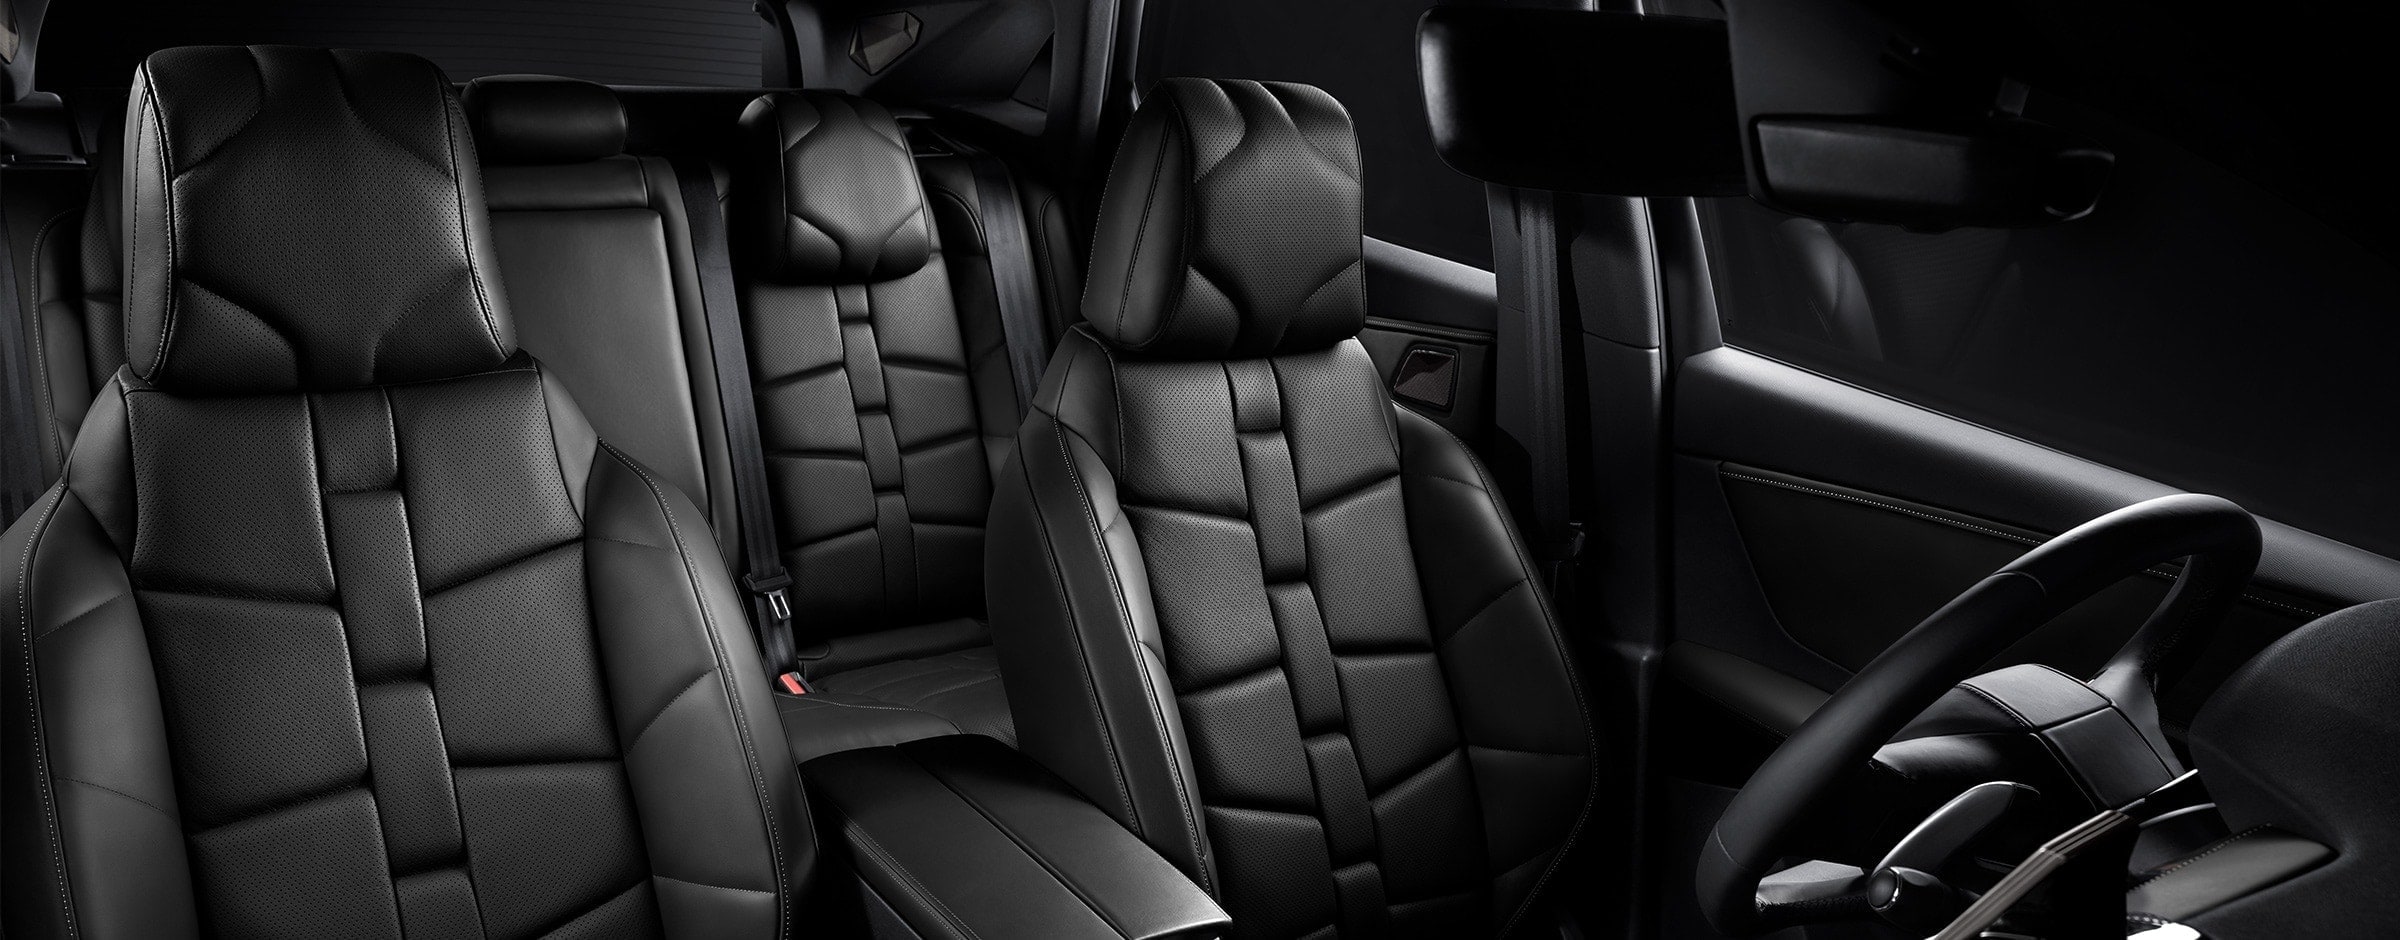 2400x940 Leather Seats